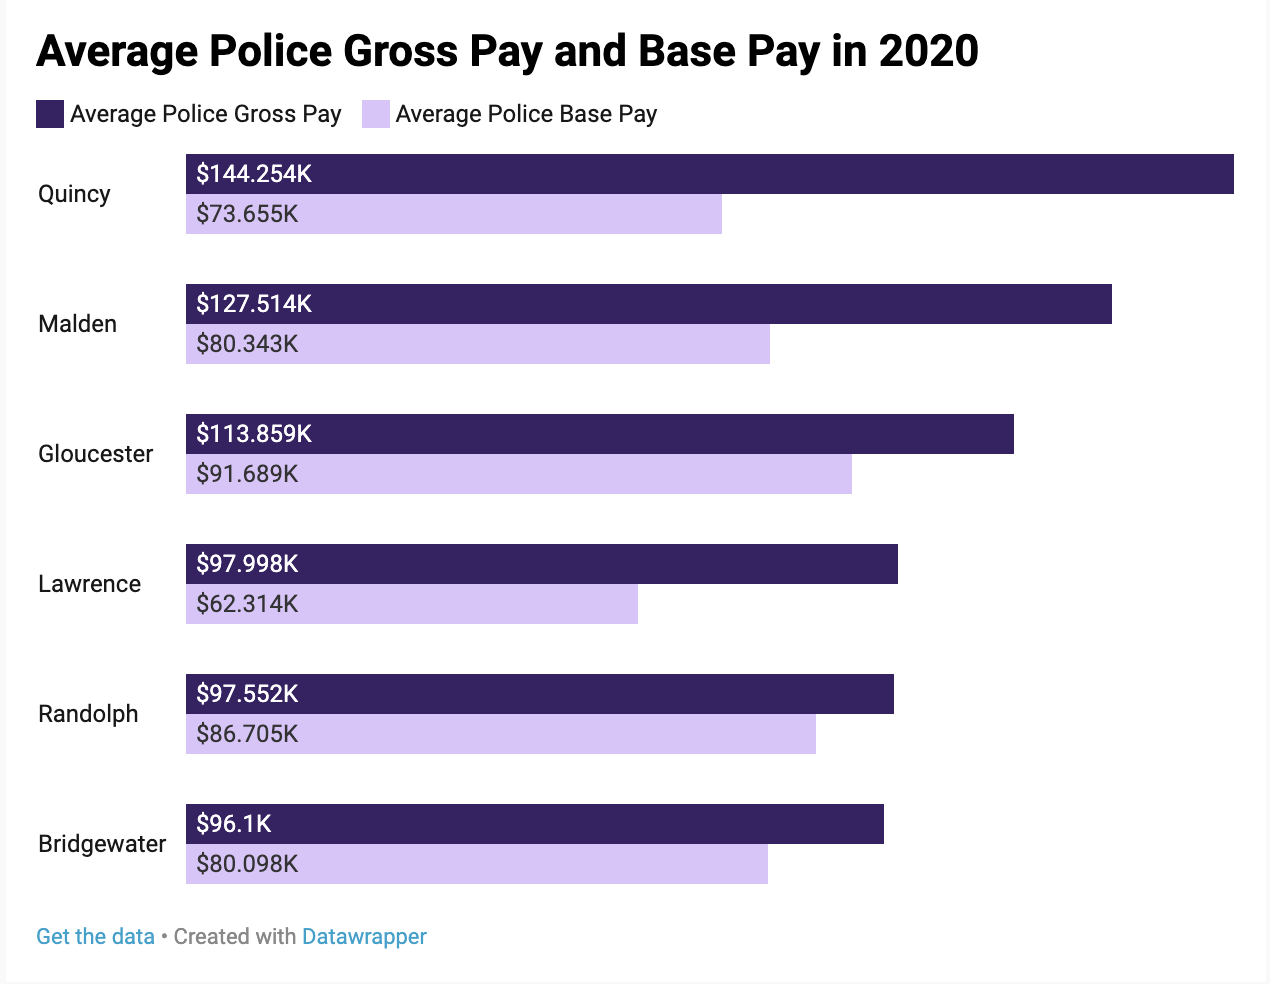 Greater Boston area police double their base pay with overtime, detail